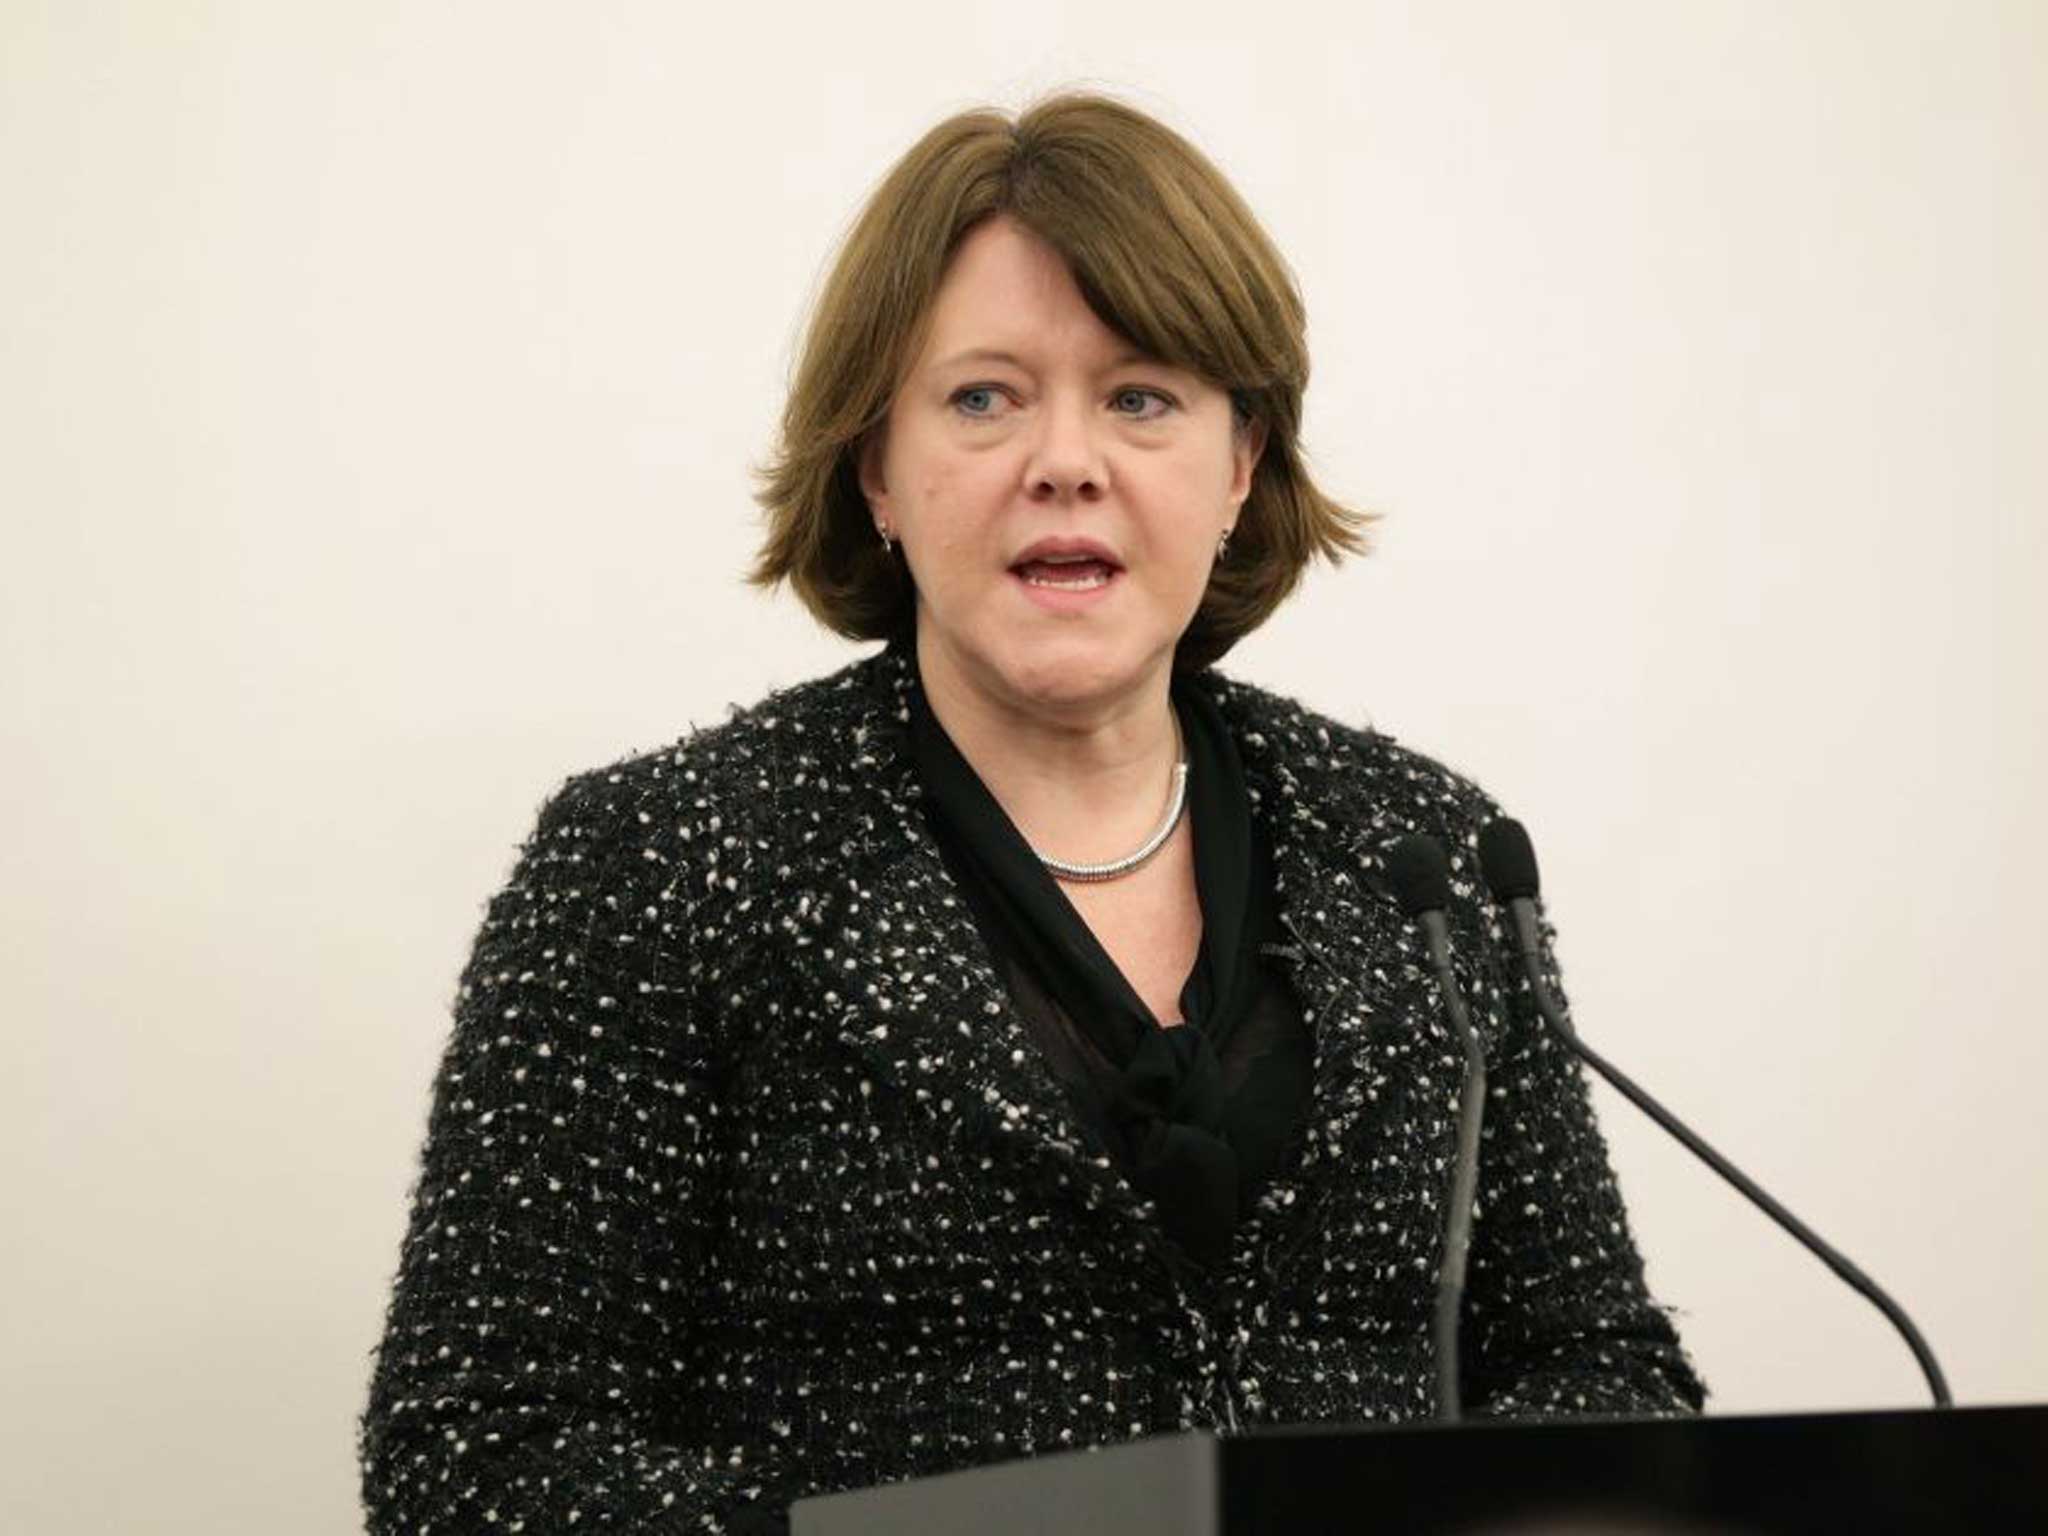 Maria Miller has come under fire for her - very - short apology